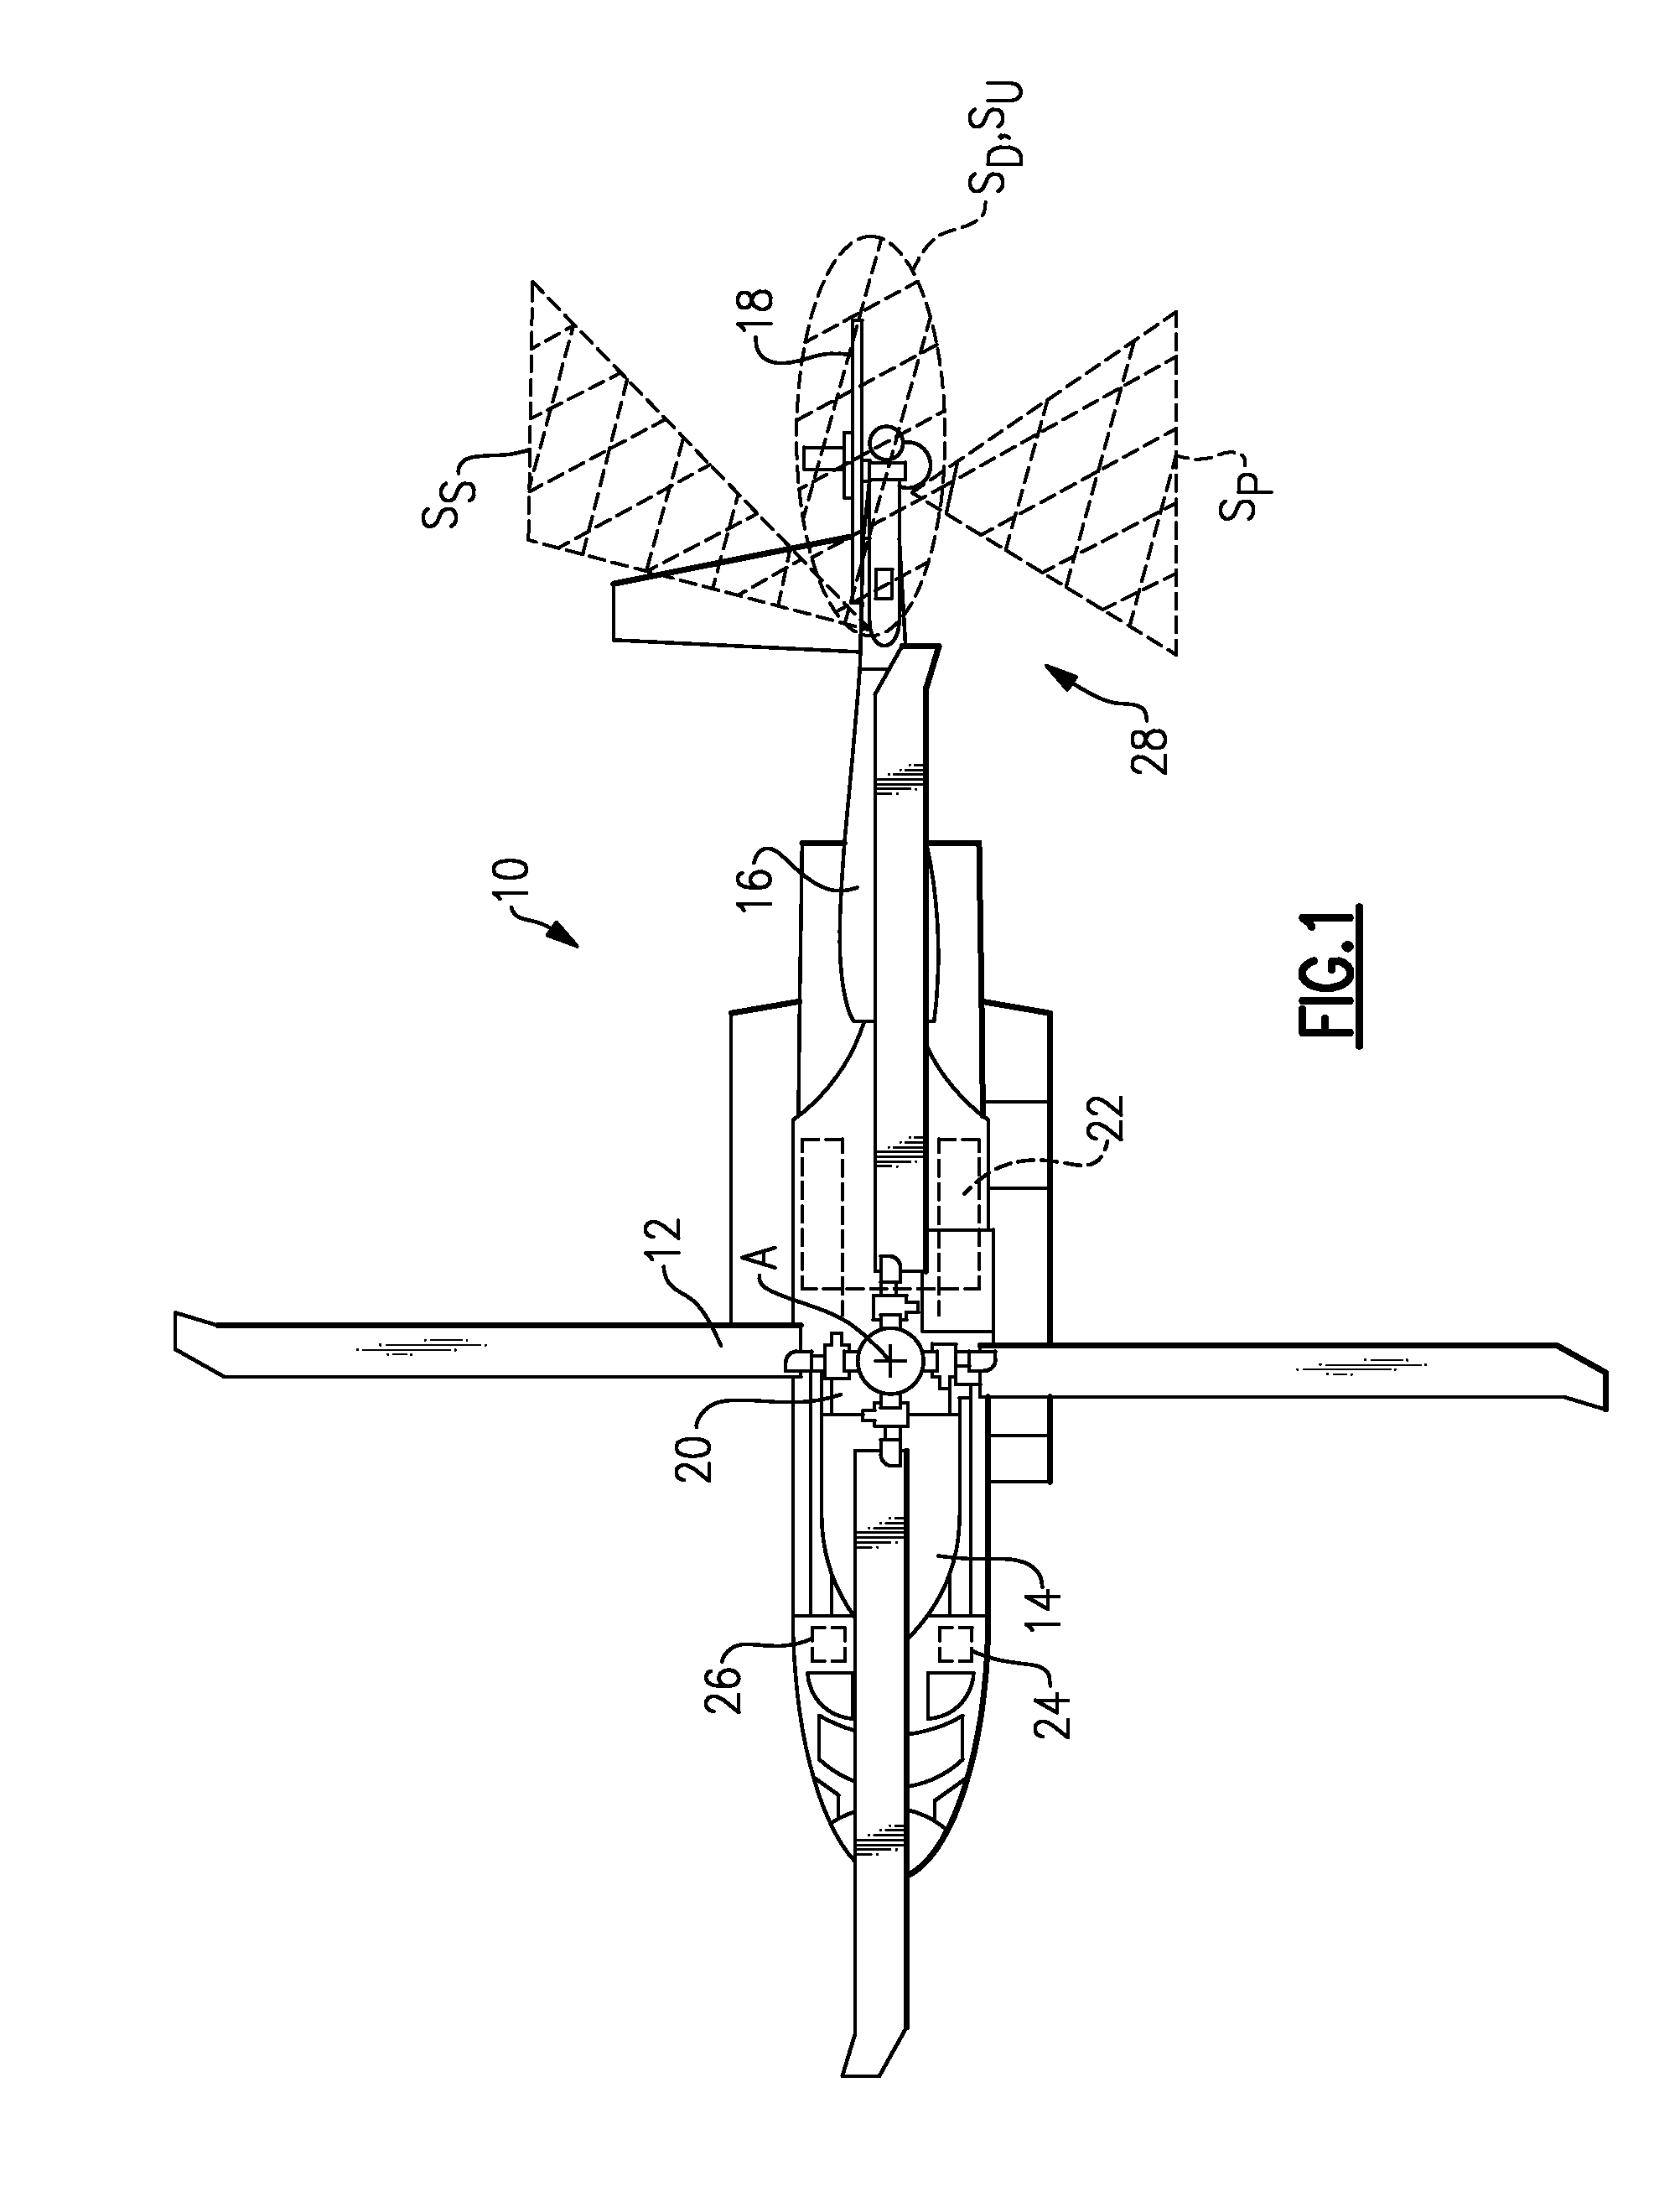 Rotary wing aircraft proximity warning system with a geographically based avoidance system